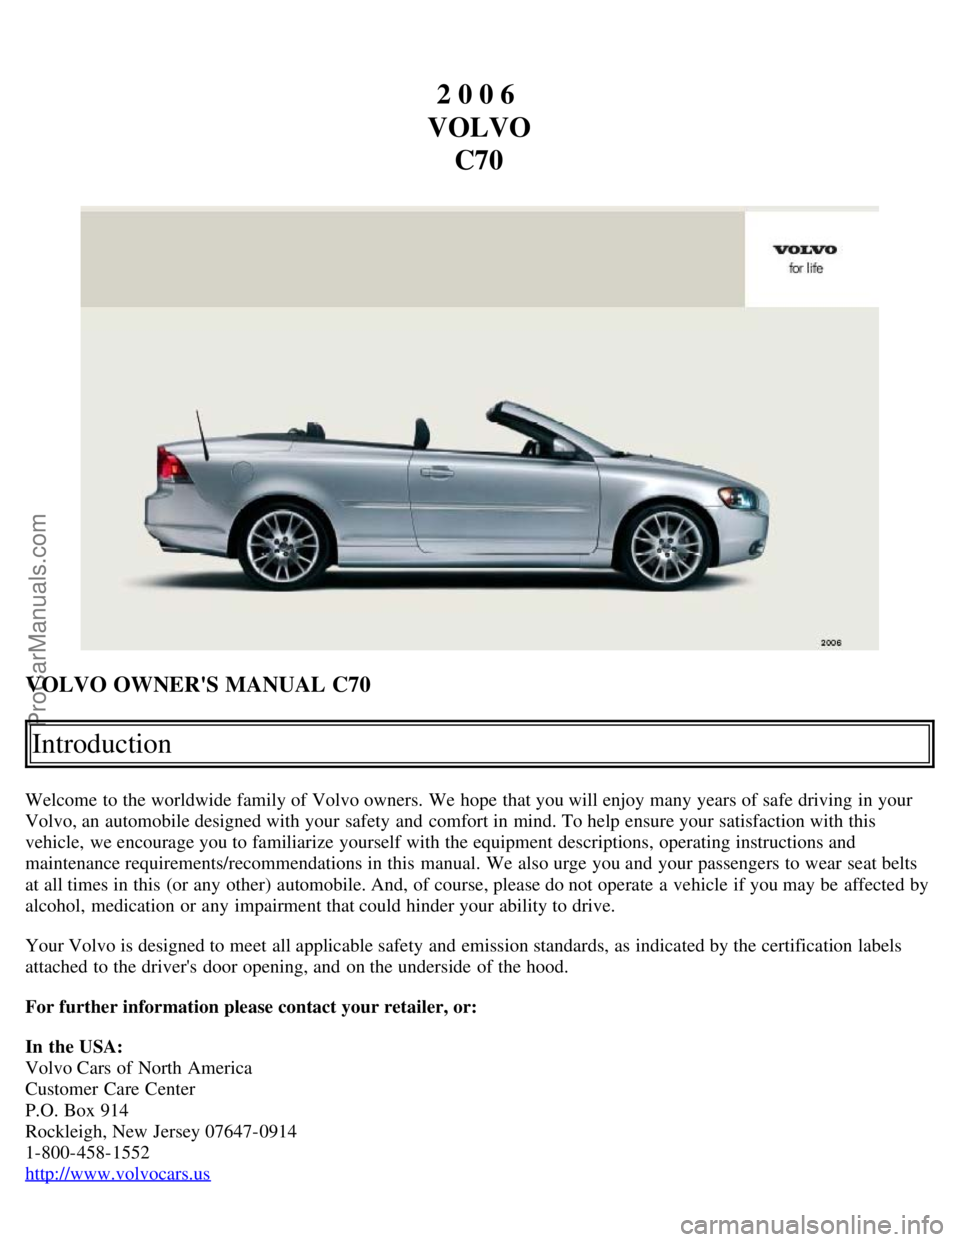 VOLVO C70 2006  Owners Manual 2 0 0 6 
VOLVO C70
VOLVO OWNERS MANUAL C70
Introduction
Welcome to the worldwide family of Volvo owners. We hope  that you will enjoy many years of safe driving in your
Volvo, an  automobile designed